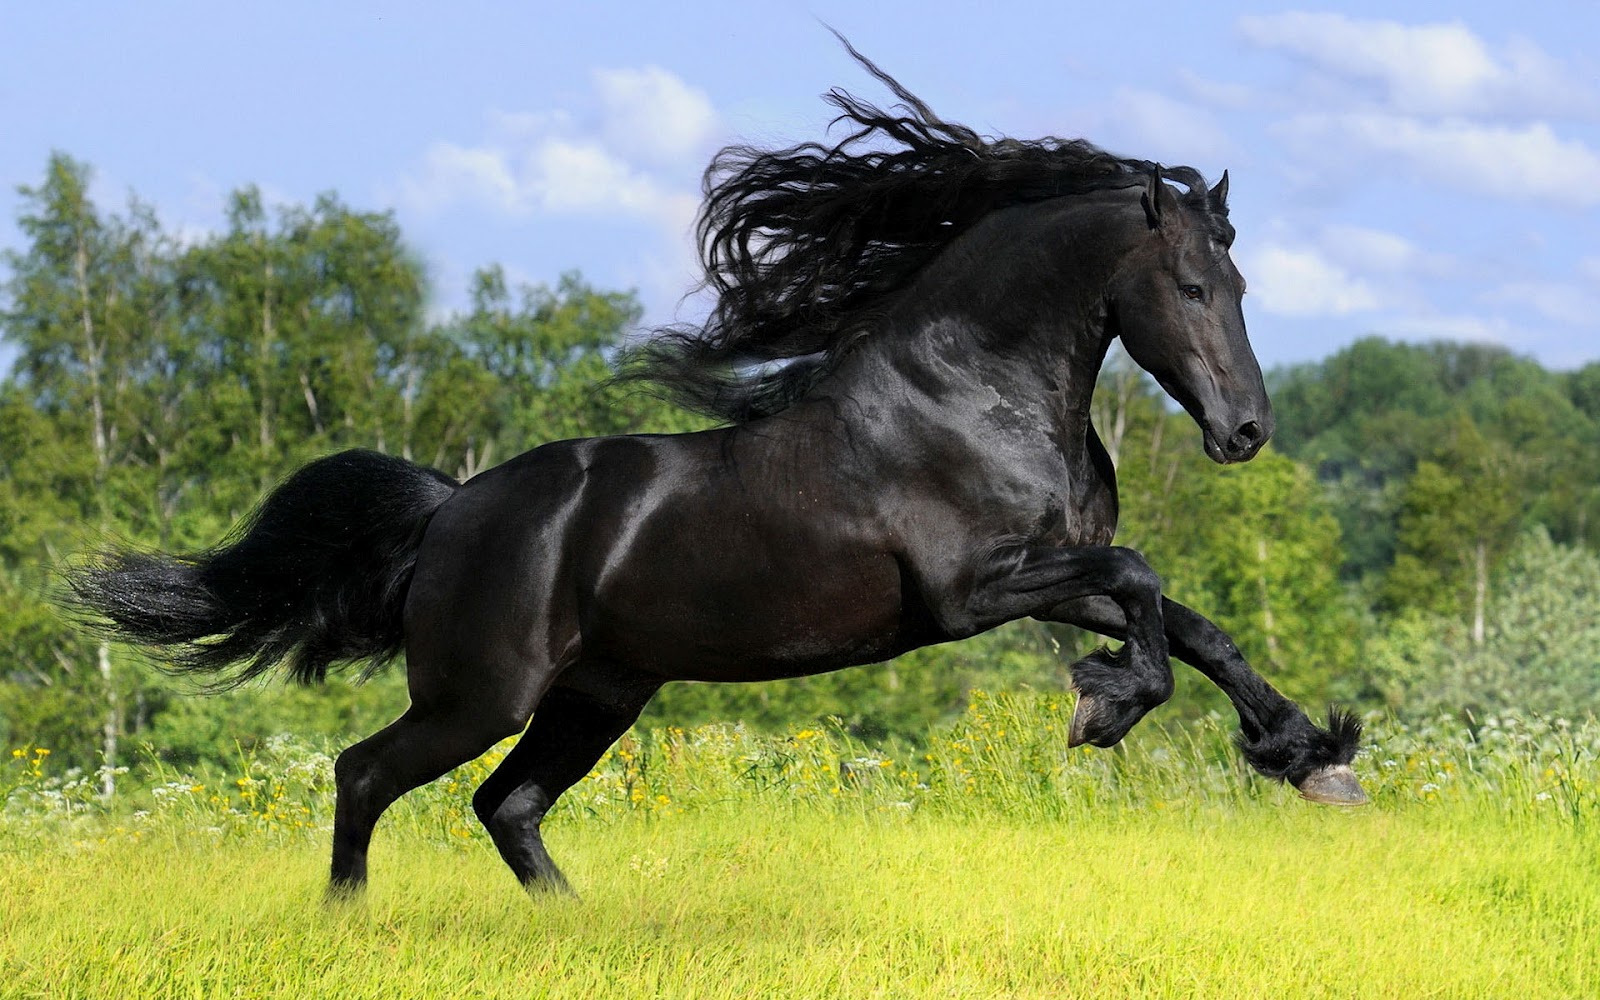 Black Horse On A Field With Grass Wallpaper Background